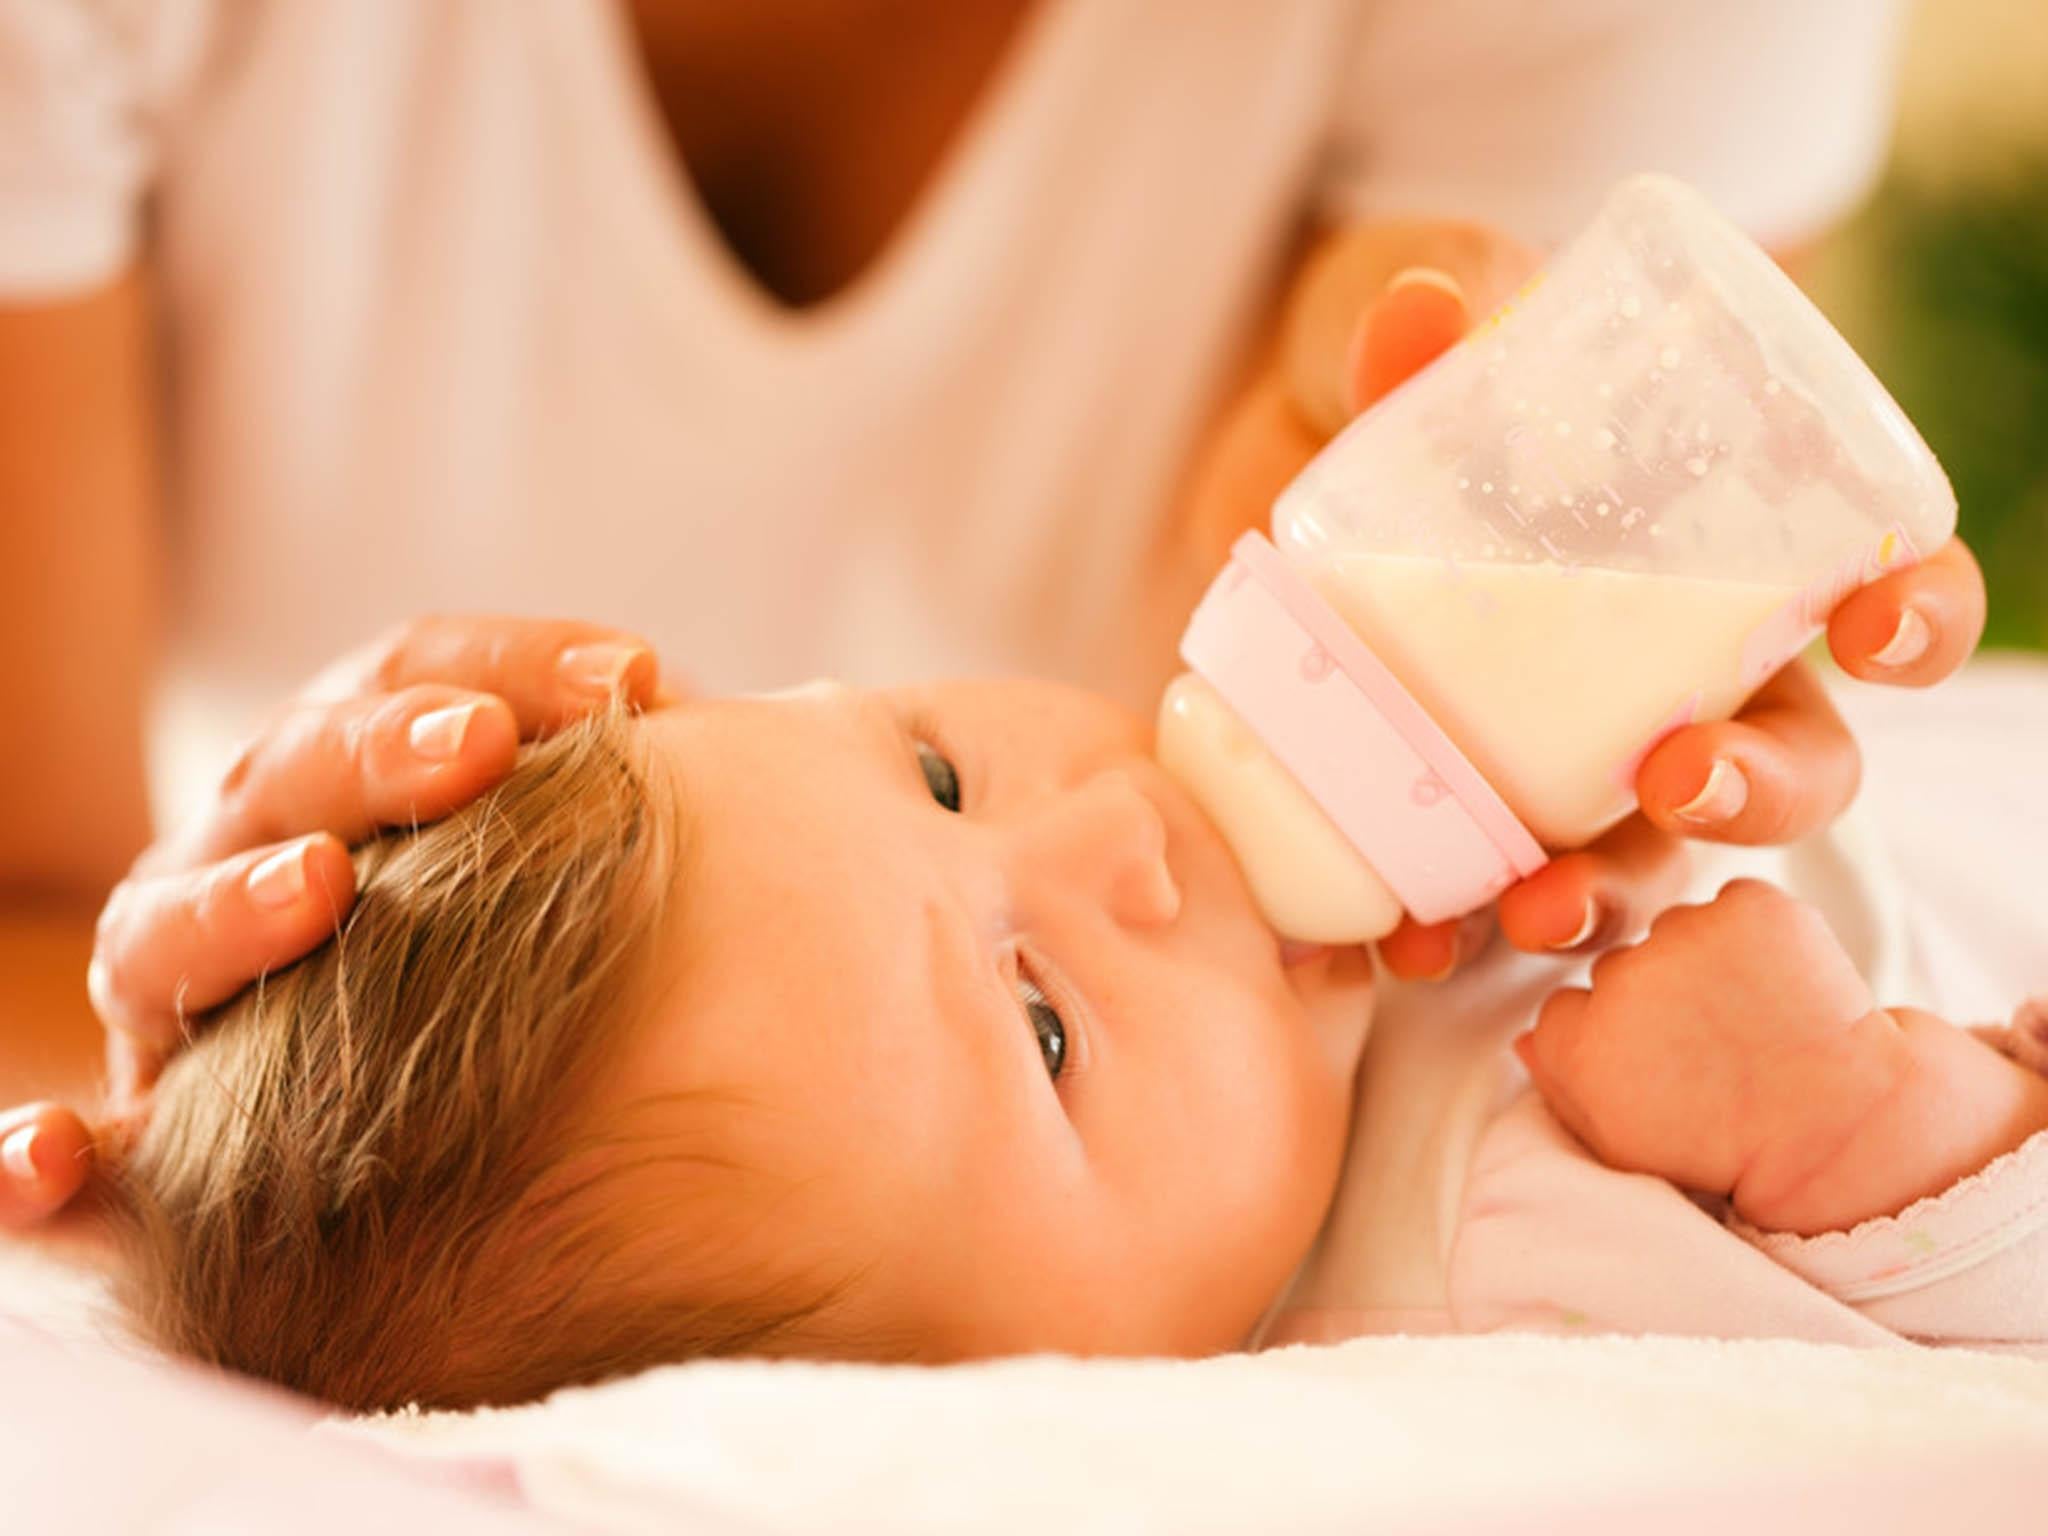 Mothers who have supplemented or solely fed their babies with formula are made to feel guilty over their decision